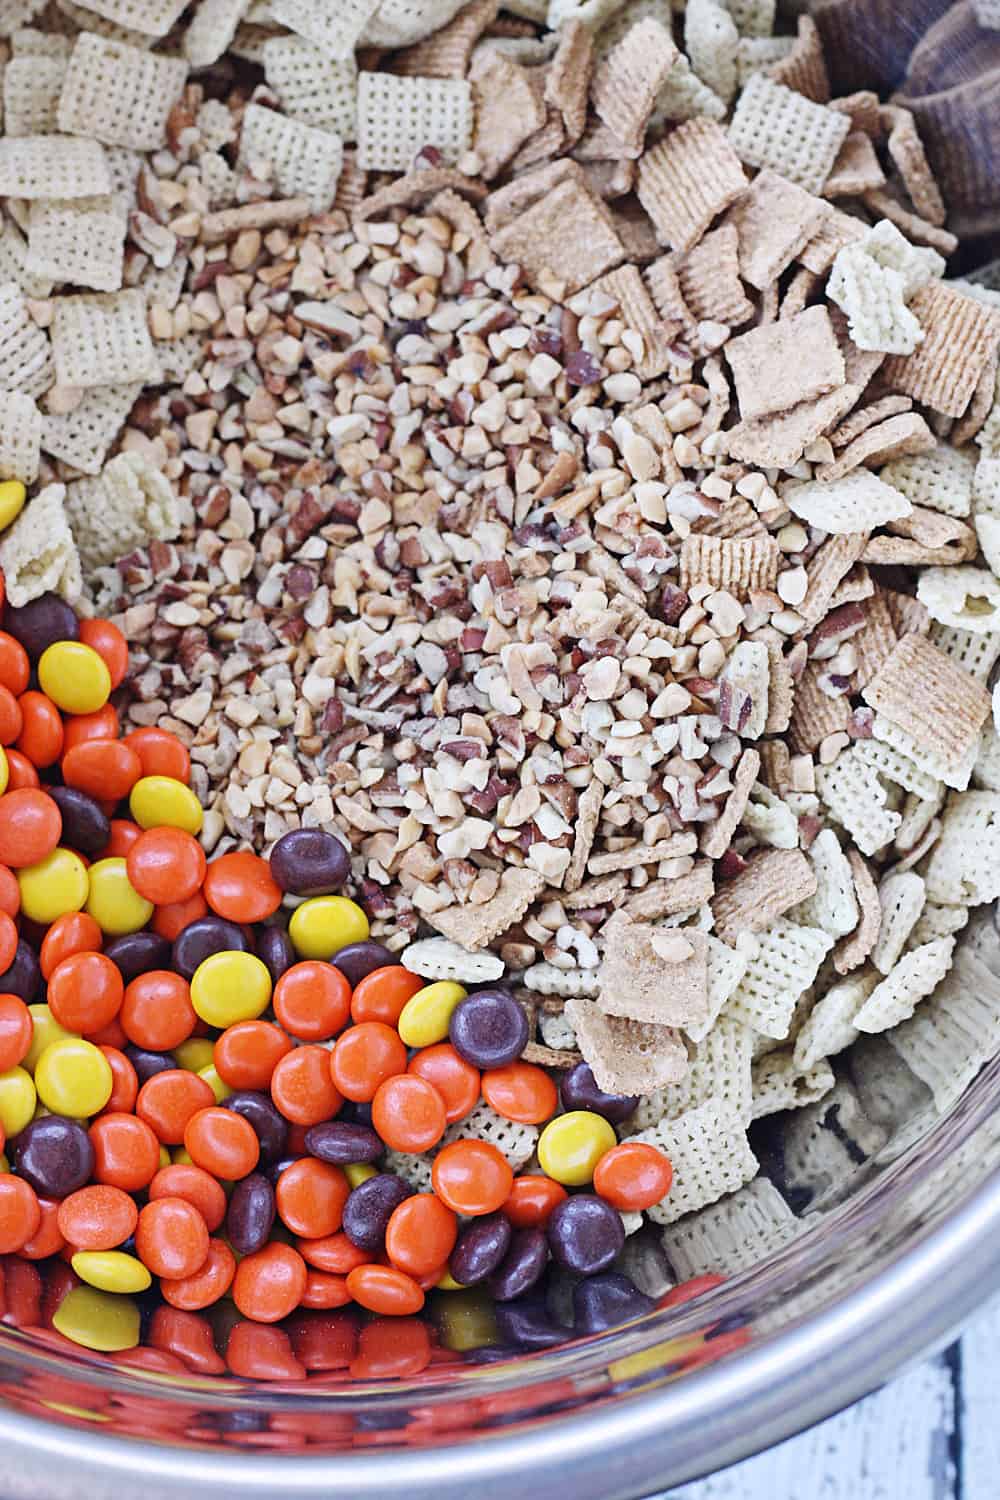 Easy Harvest Chex Mix - Getting your harvest Chex mix fix is easier than you think. Thanks to this easy recipe, that sweet, peanut-buttery fall Chex mix is only a few minutes away! #chex #chexmix #harvestchexmix #fallchexmix #peanutbutter #easyrecipe #easydessert #dessert #sweet #halfscratched #CreatewithKaro #KaroSyrup #Recipeideas #ad